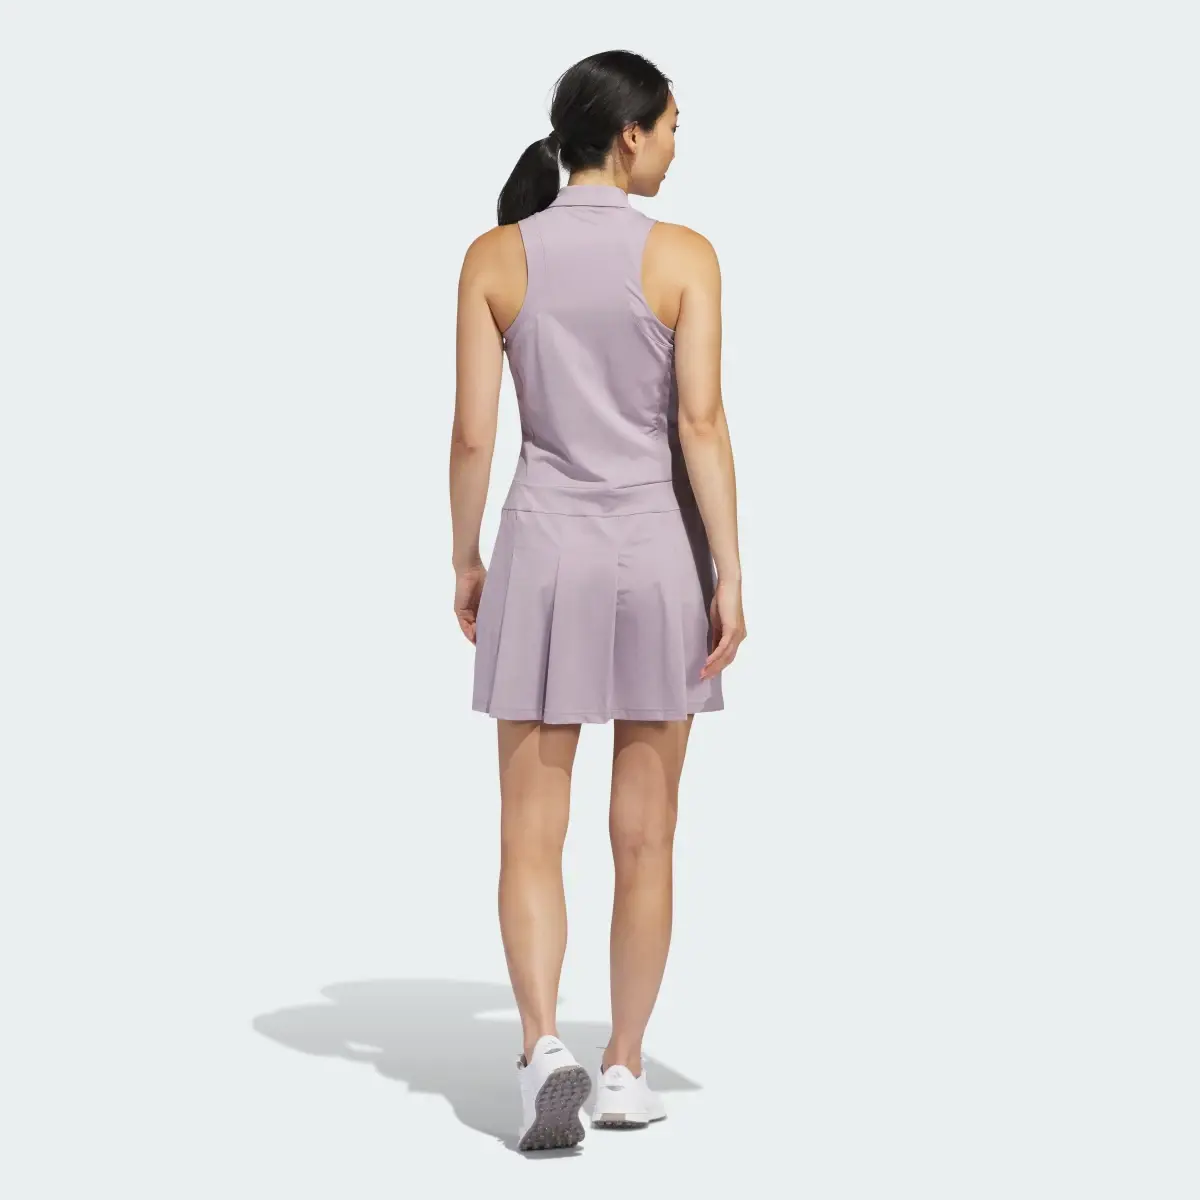 Adidas Women's Ultimate365 Tour Pleated Dress. 3